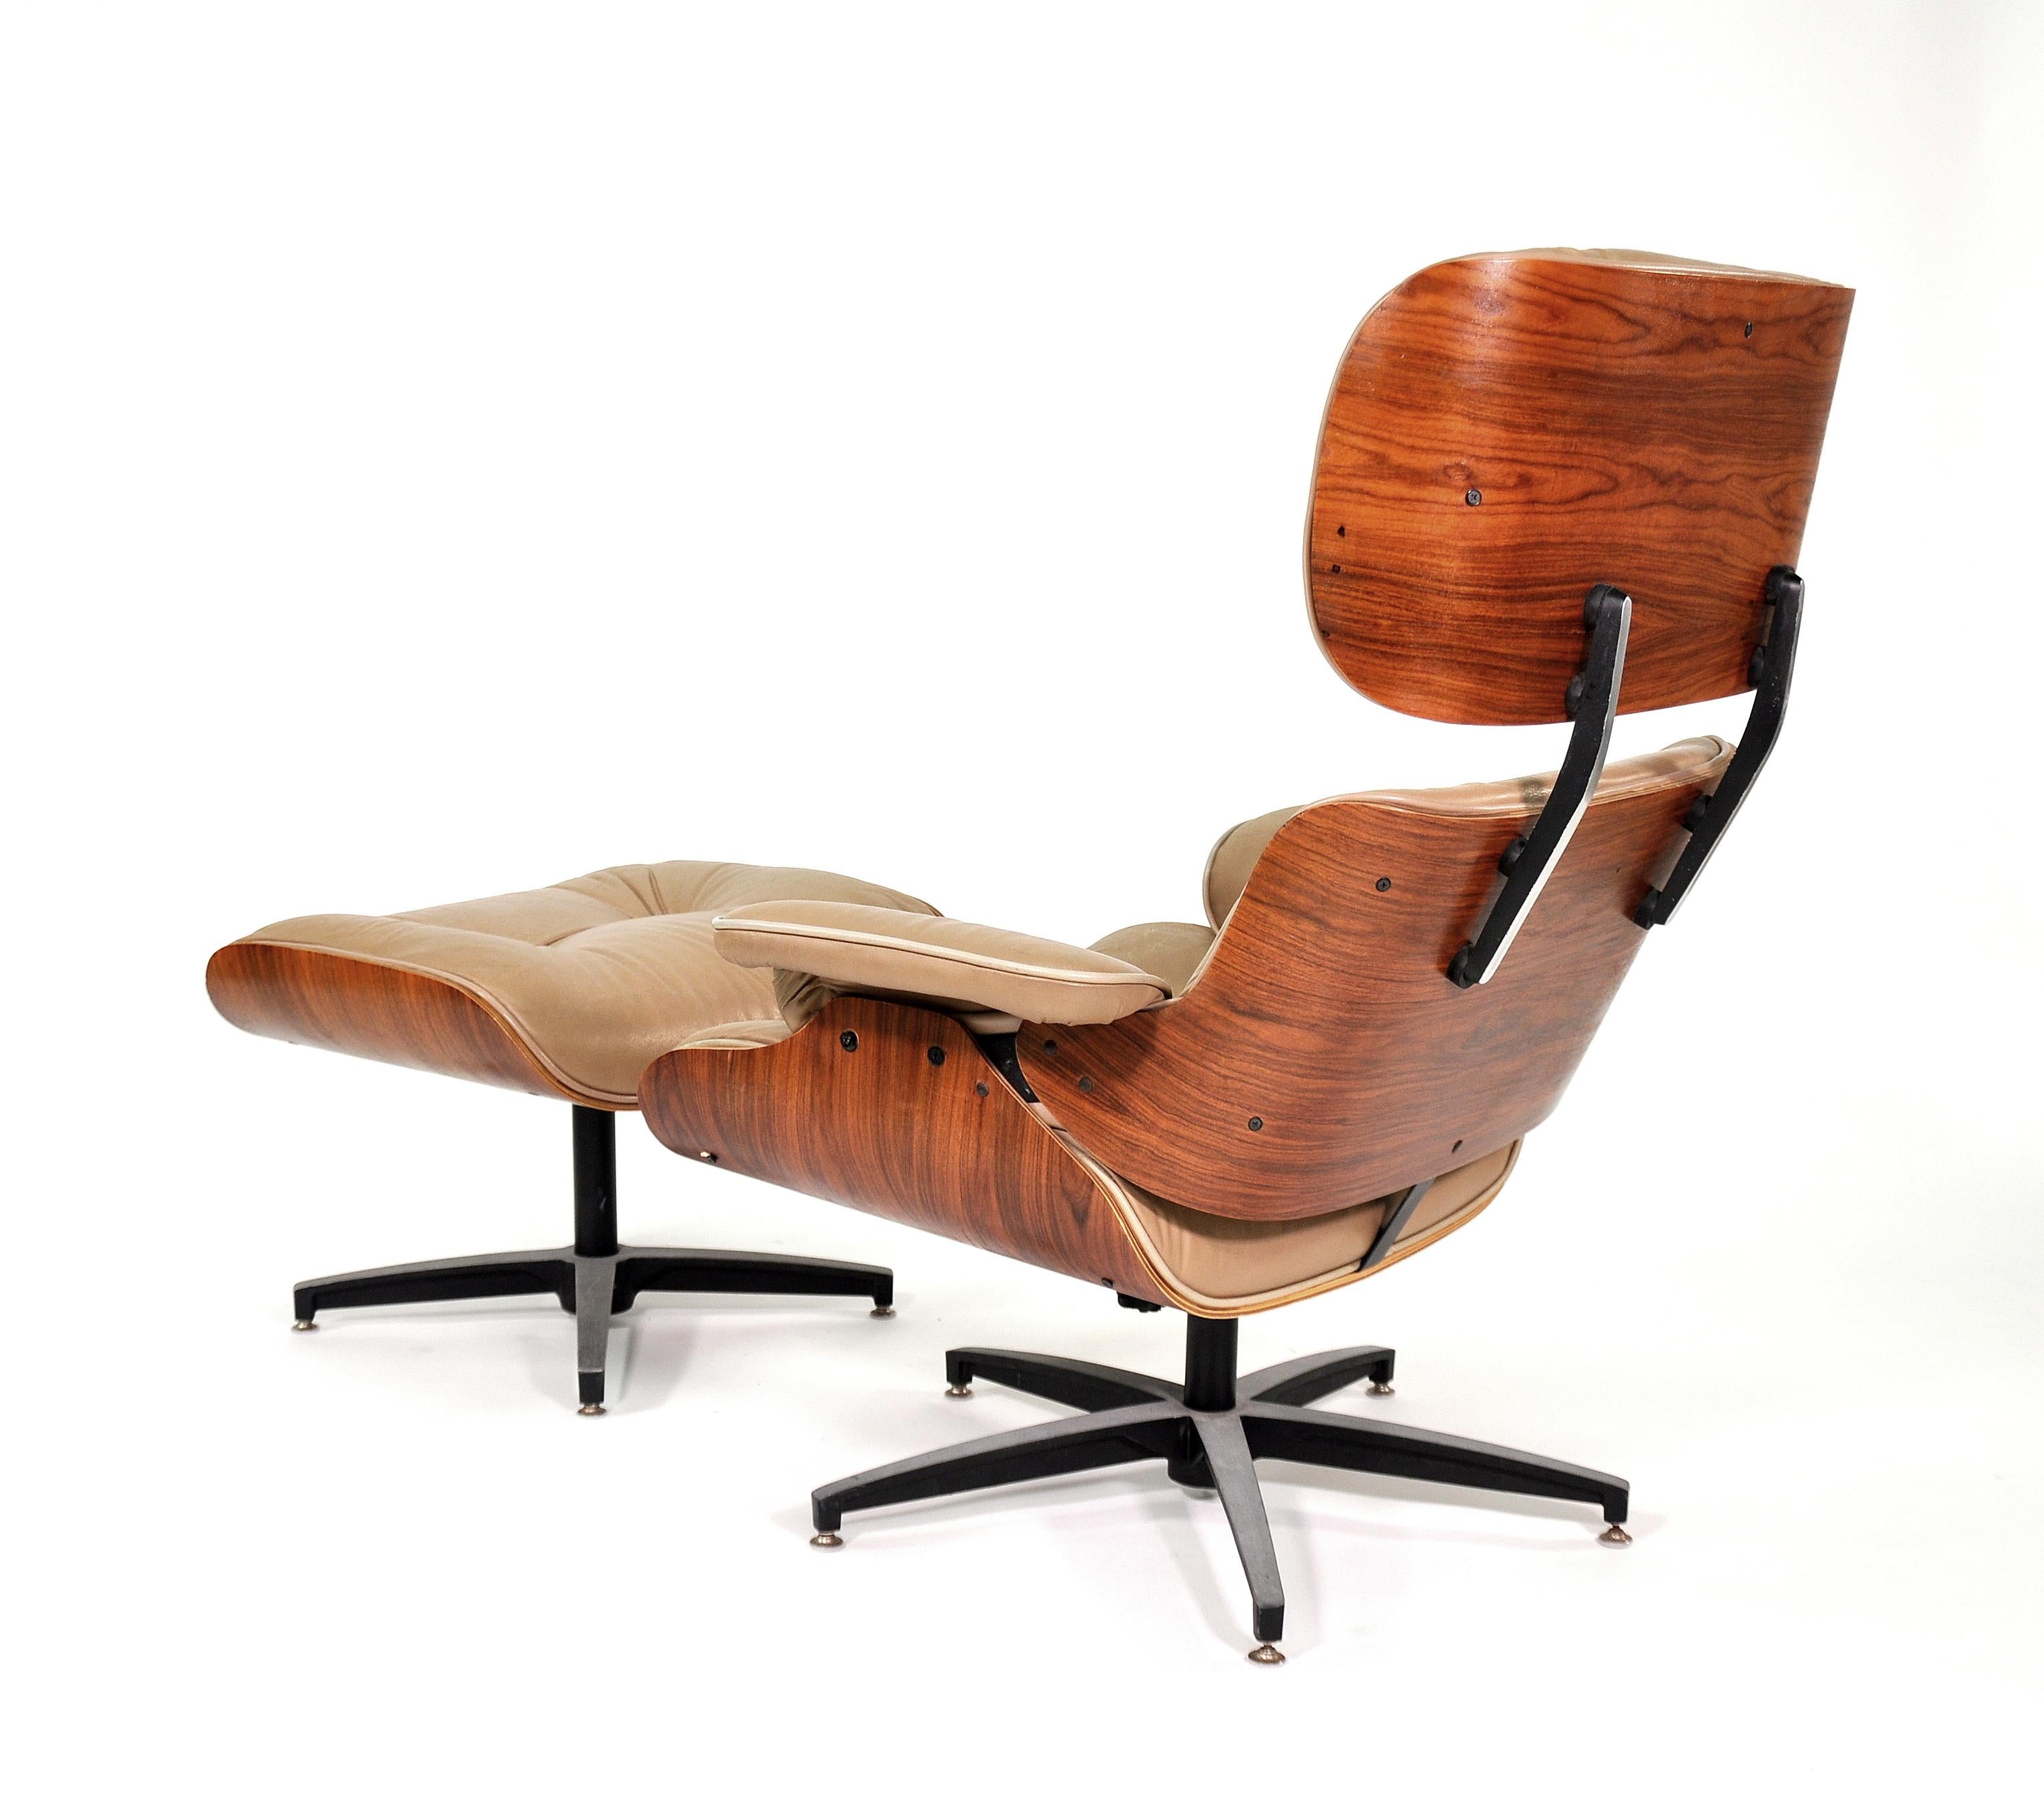 Mid-20th Century Midcentury Eames Style Leather Lounge Chair and Ottoman